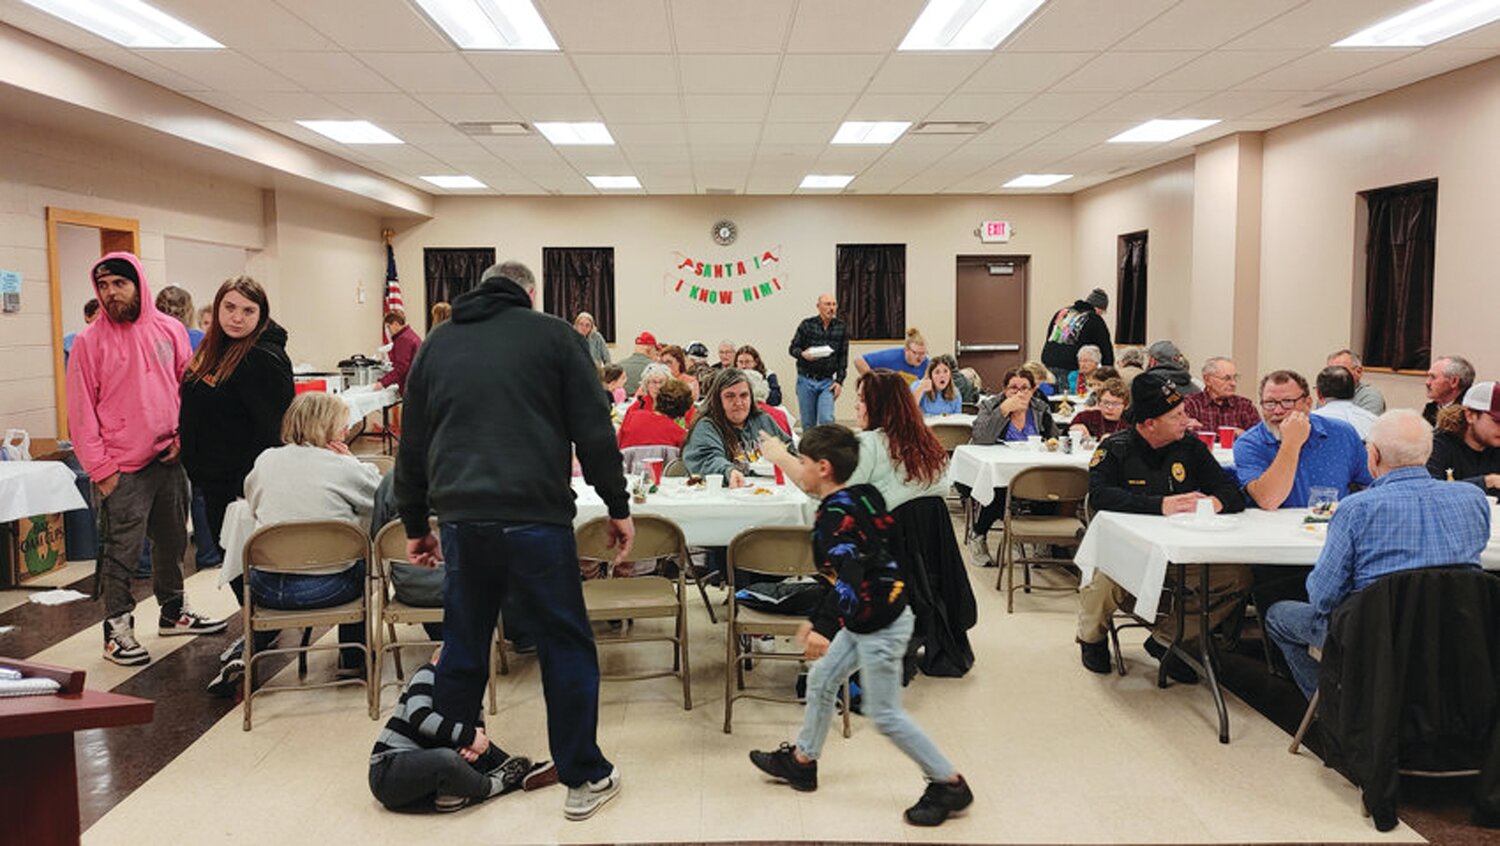 The Dunlap community gathered for the eighth annual Marge Peterson Memorial Christmas Community Dinner last year.